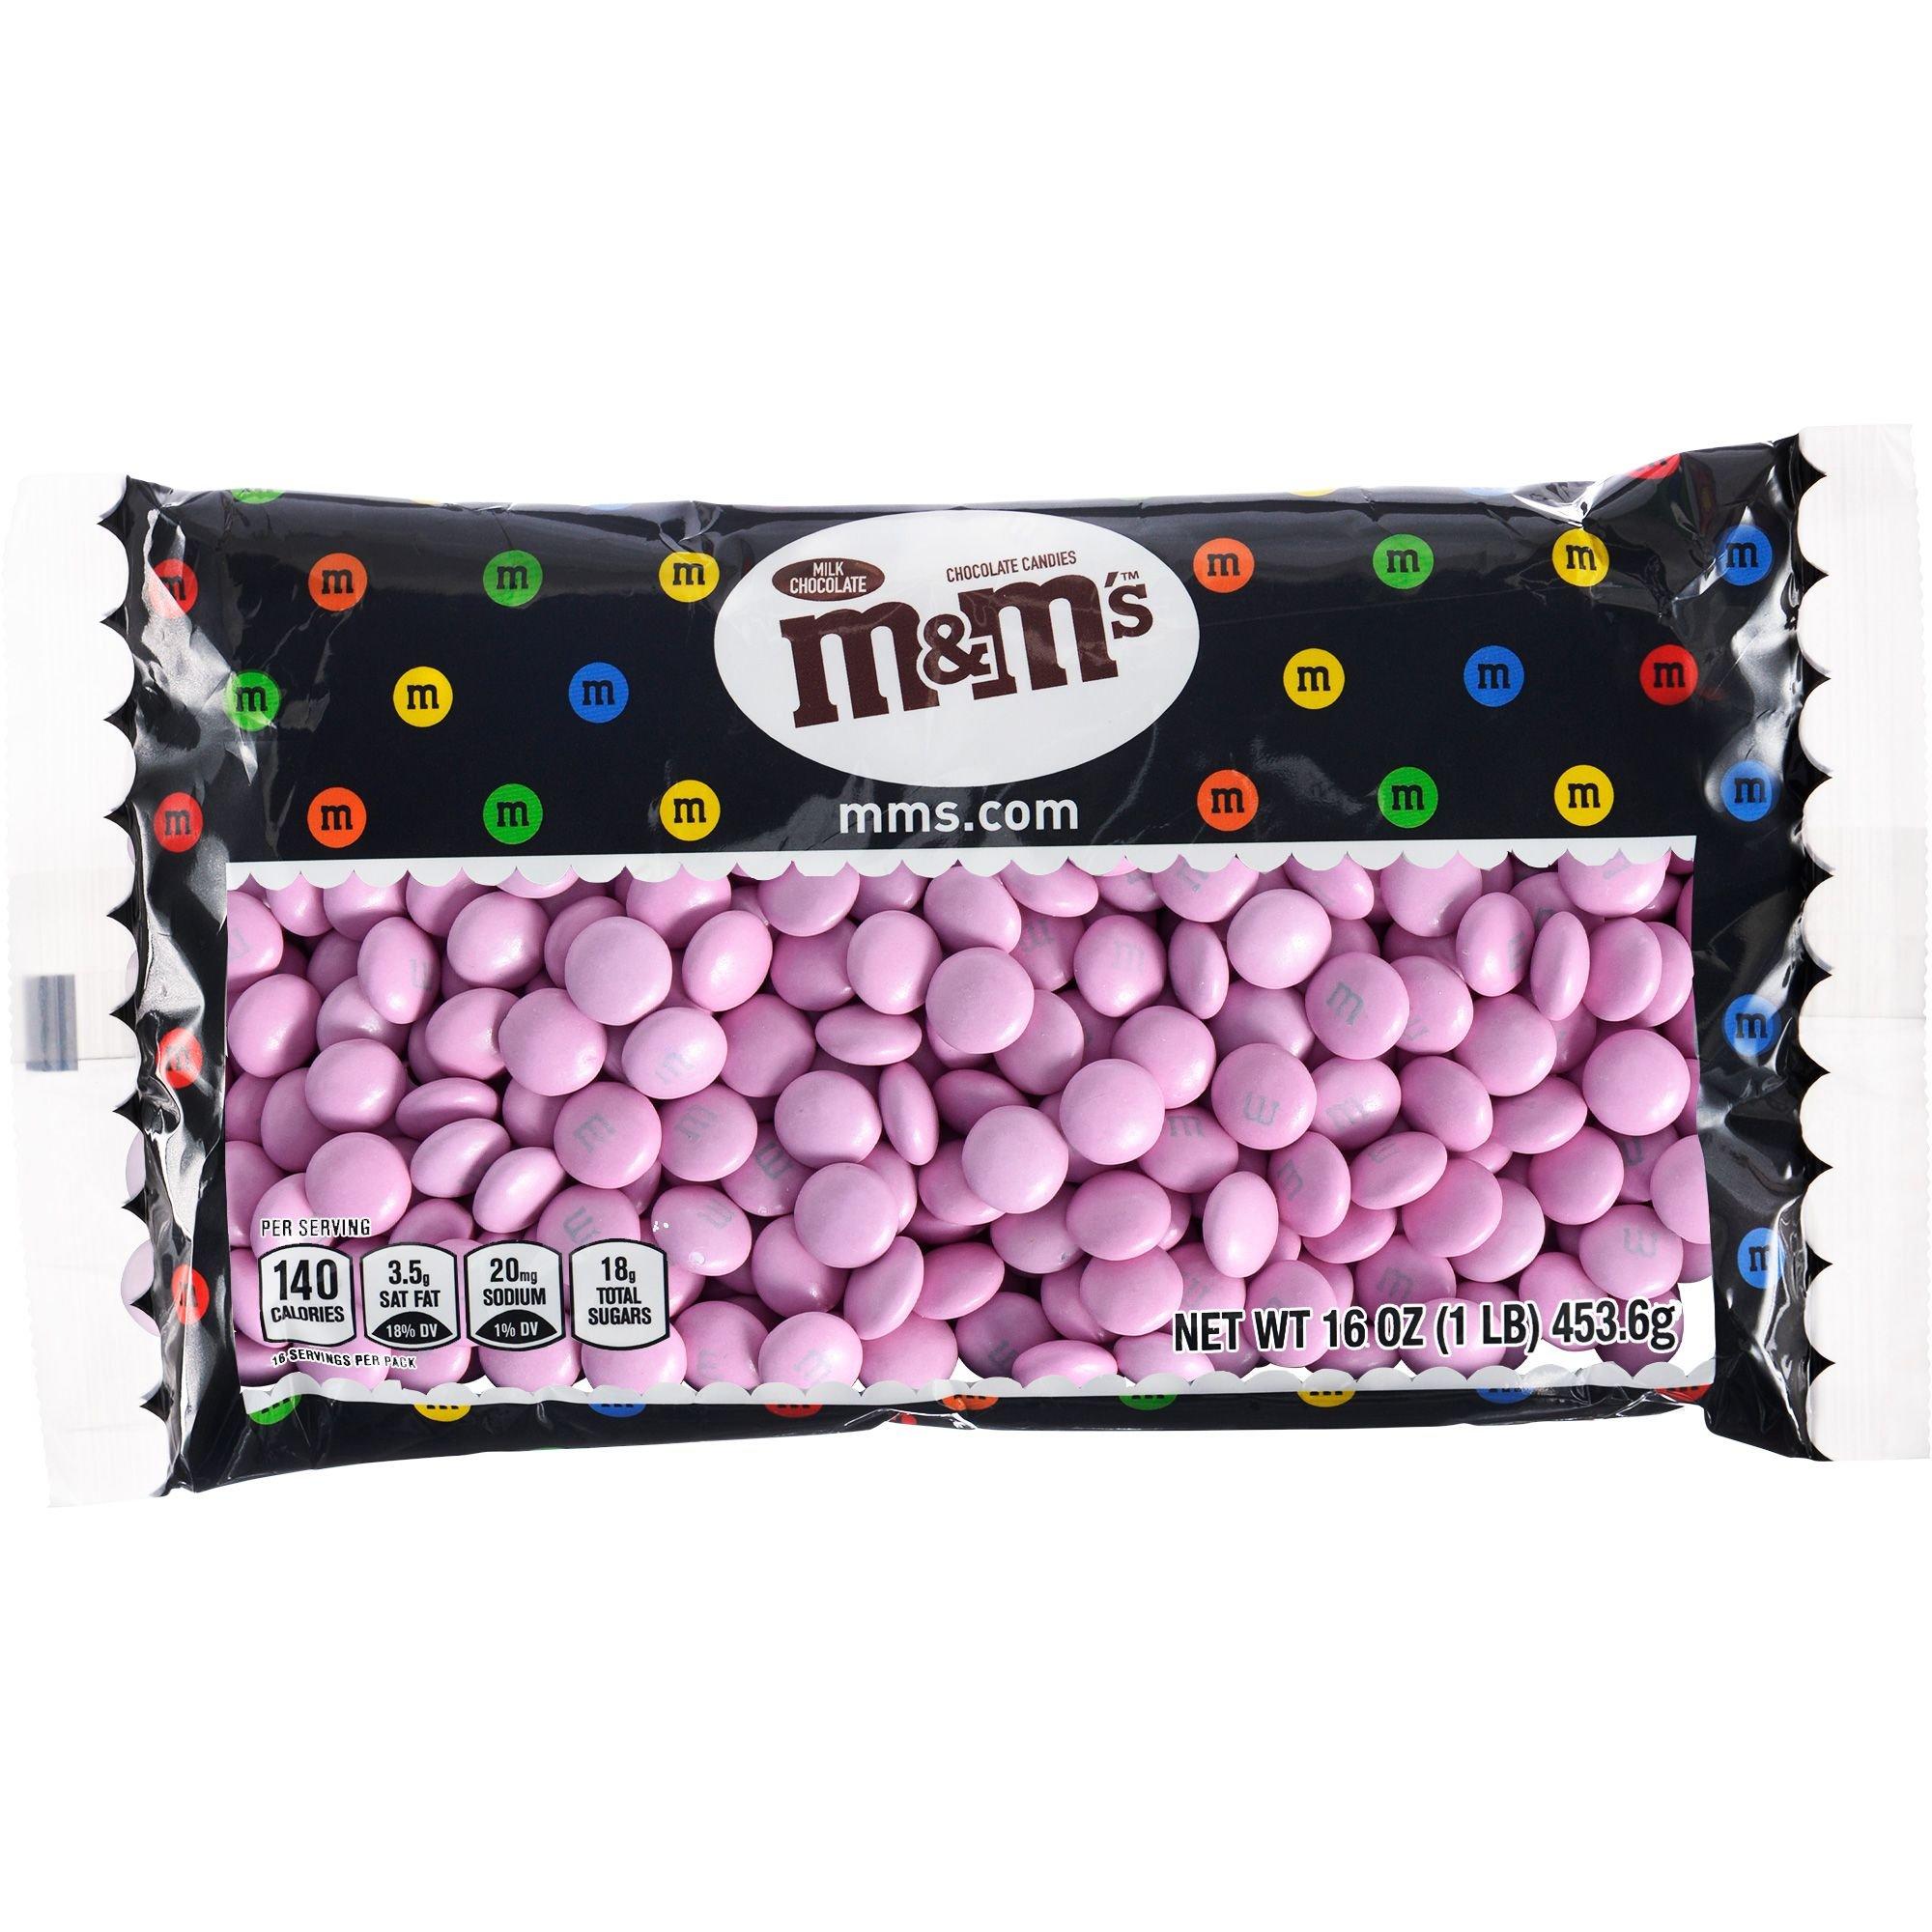 M&M'S Party Size Limited Edition Peanut Milk Chocolate Candy featuring  Purple Candy Bulk Bag, 38 oz - Baker's